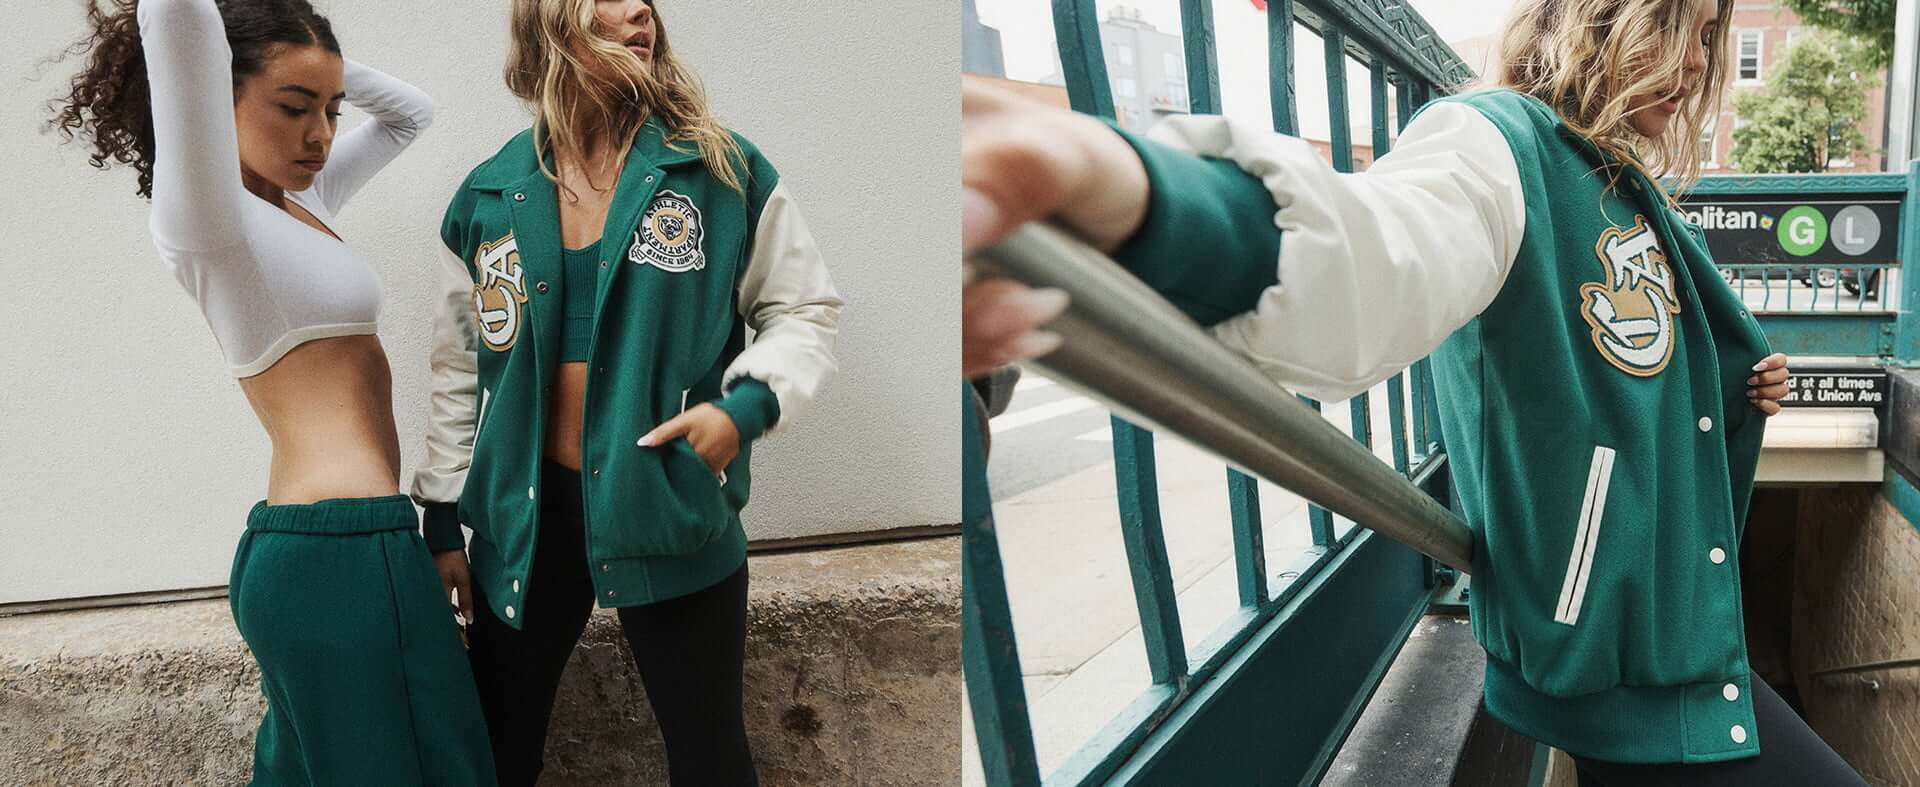 Model on the left is wearing a white top and model on the right is wearing a green varsity jacket.